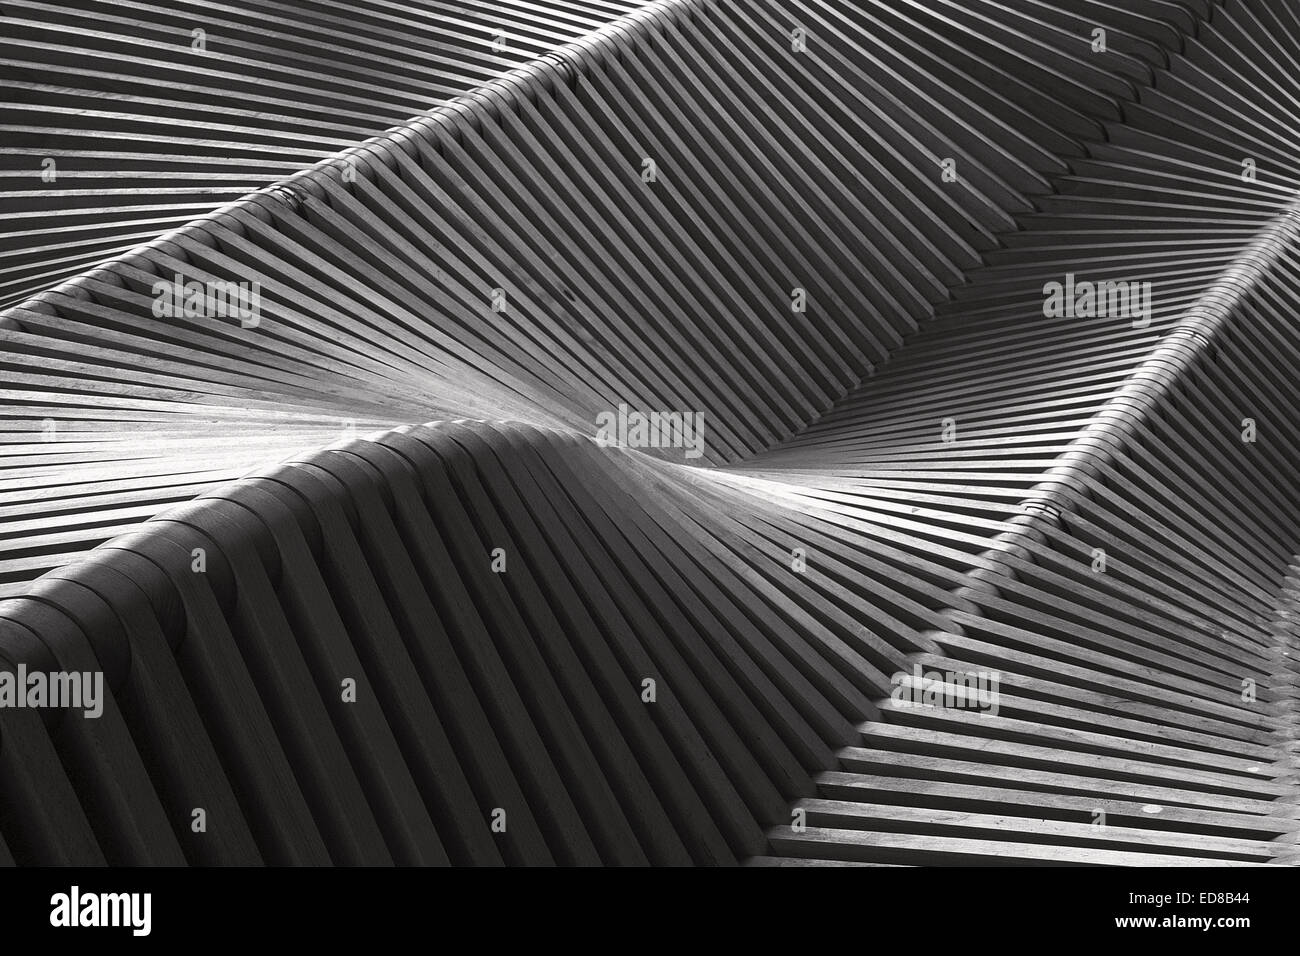 Abstract black and white wooden structure Stock Photo